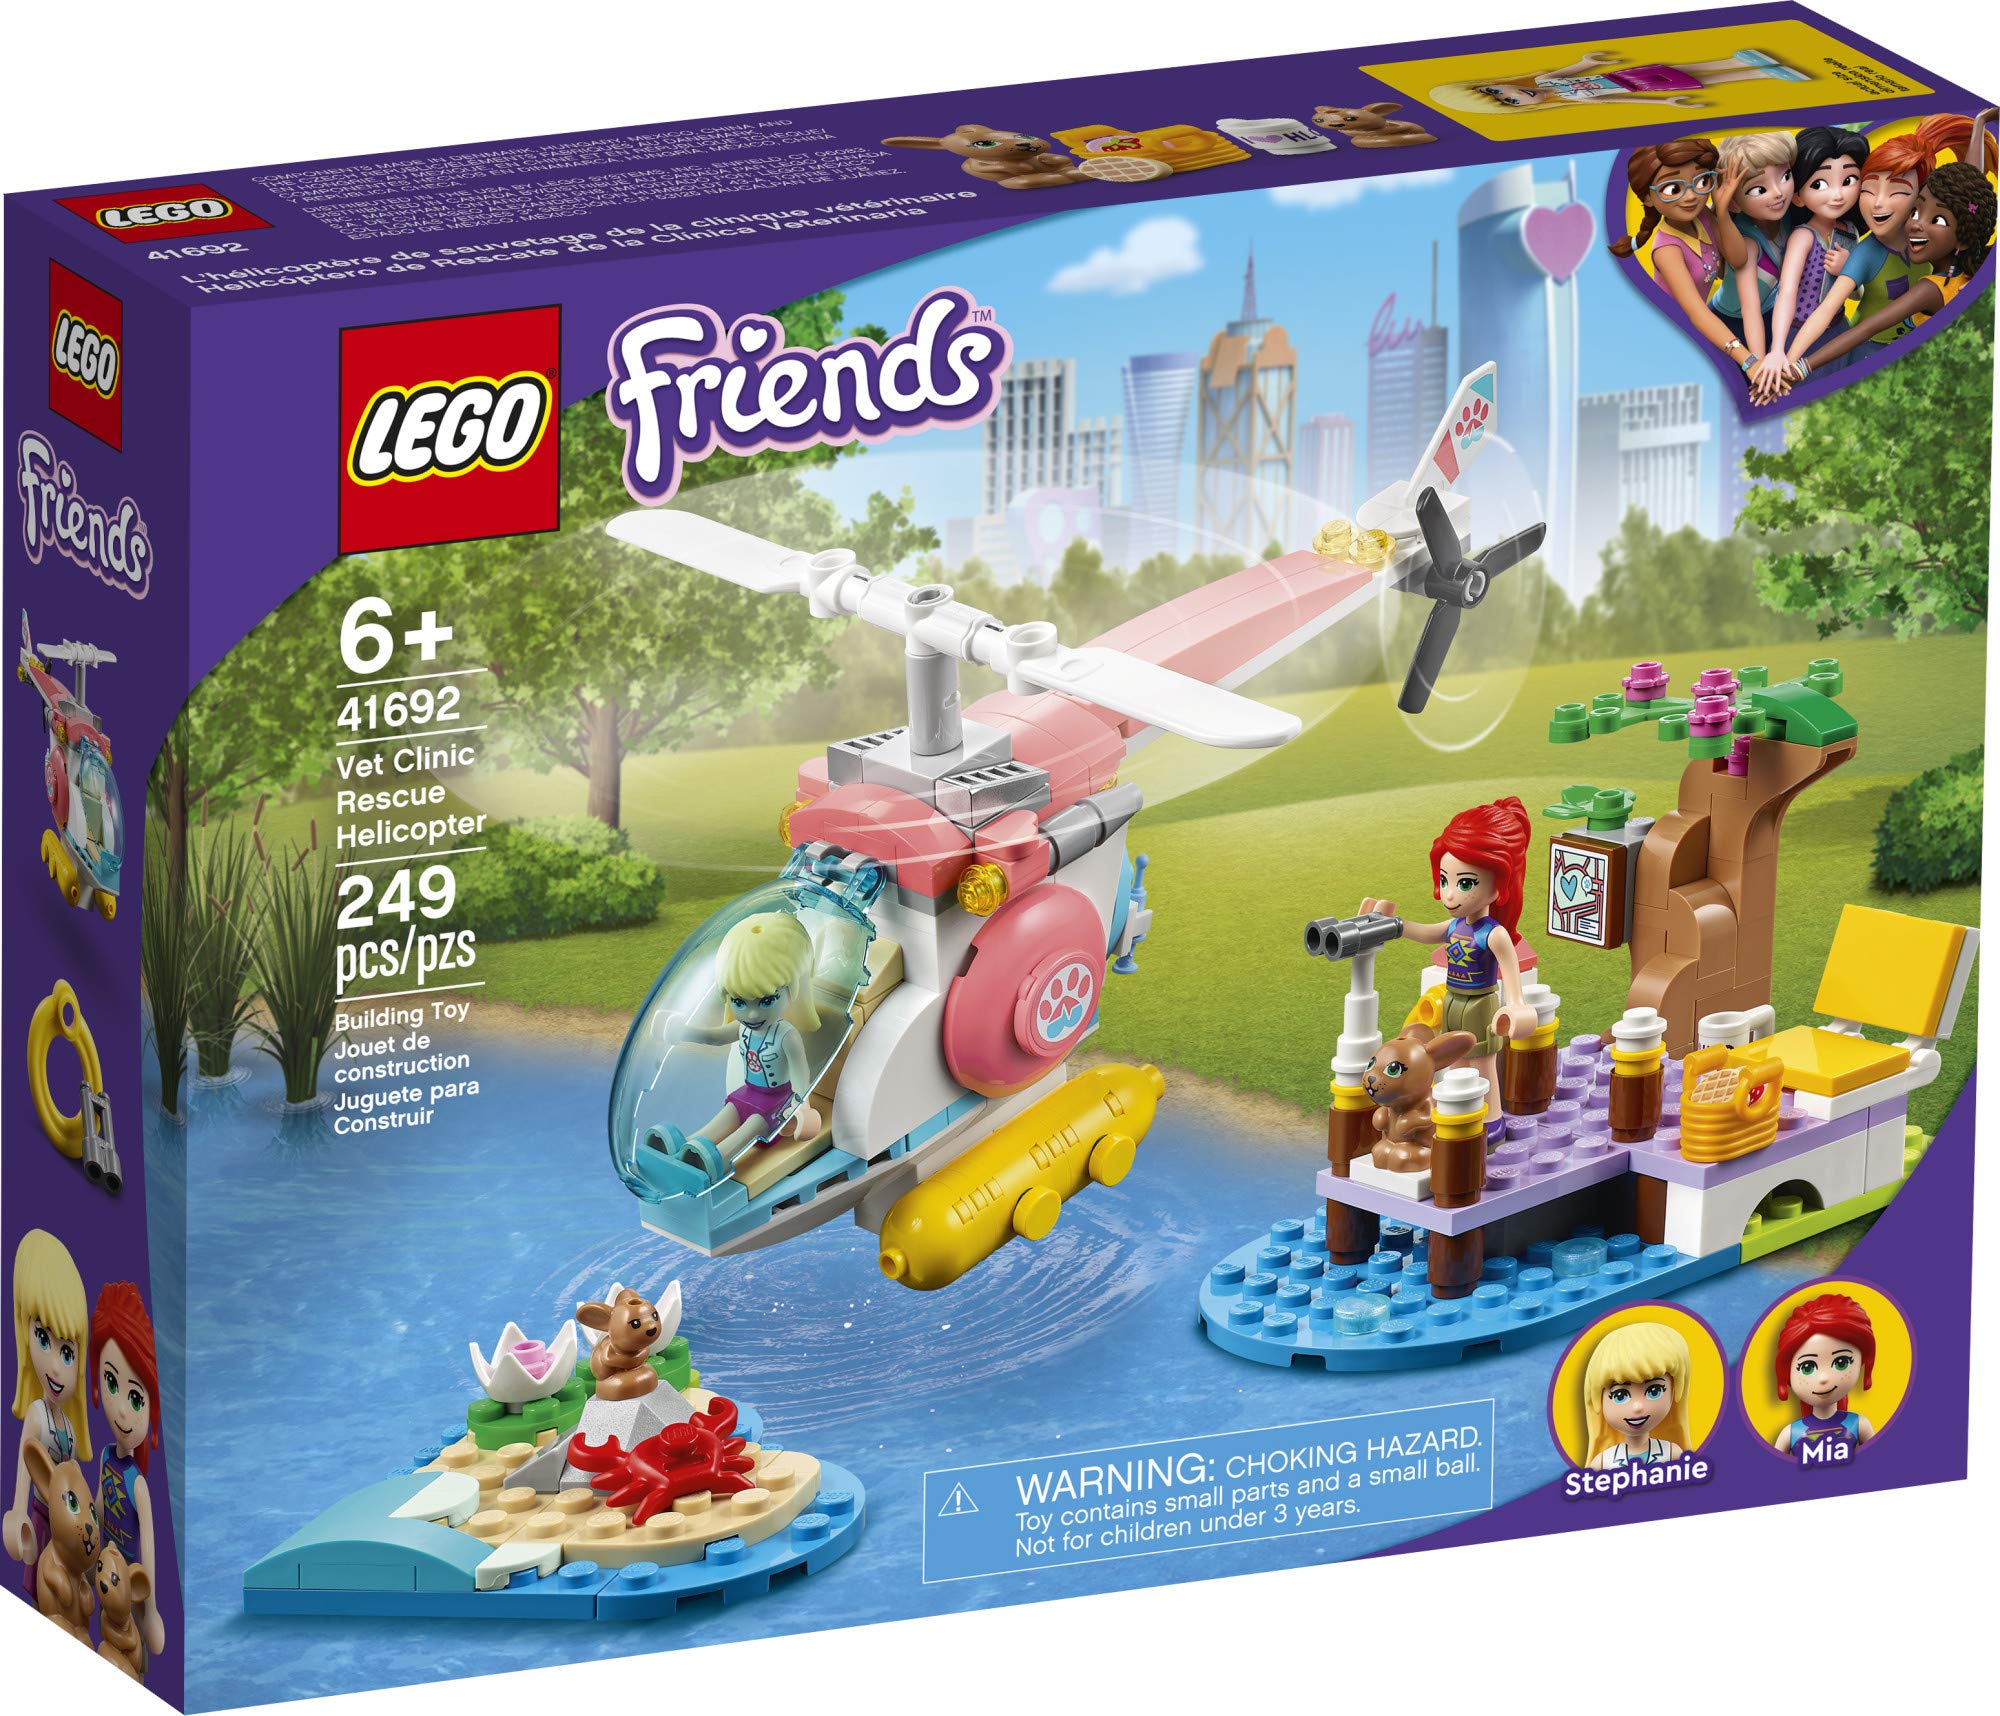 LEGO Friends Vet Clinic Rescue Helicopter 41692 Building Kit; Makes Great Birthday for Kids, New 2021 (249 Pieces)